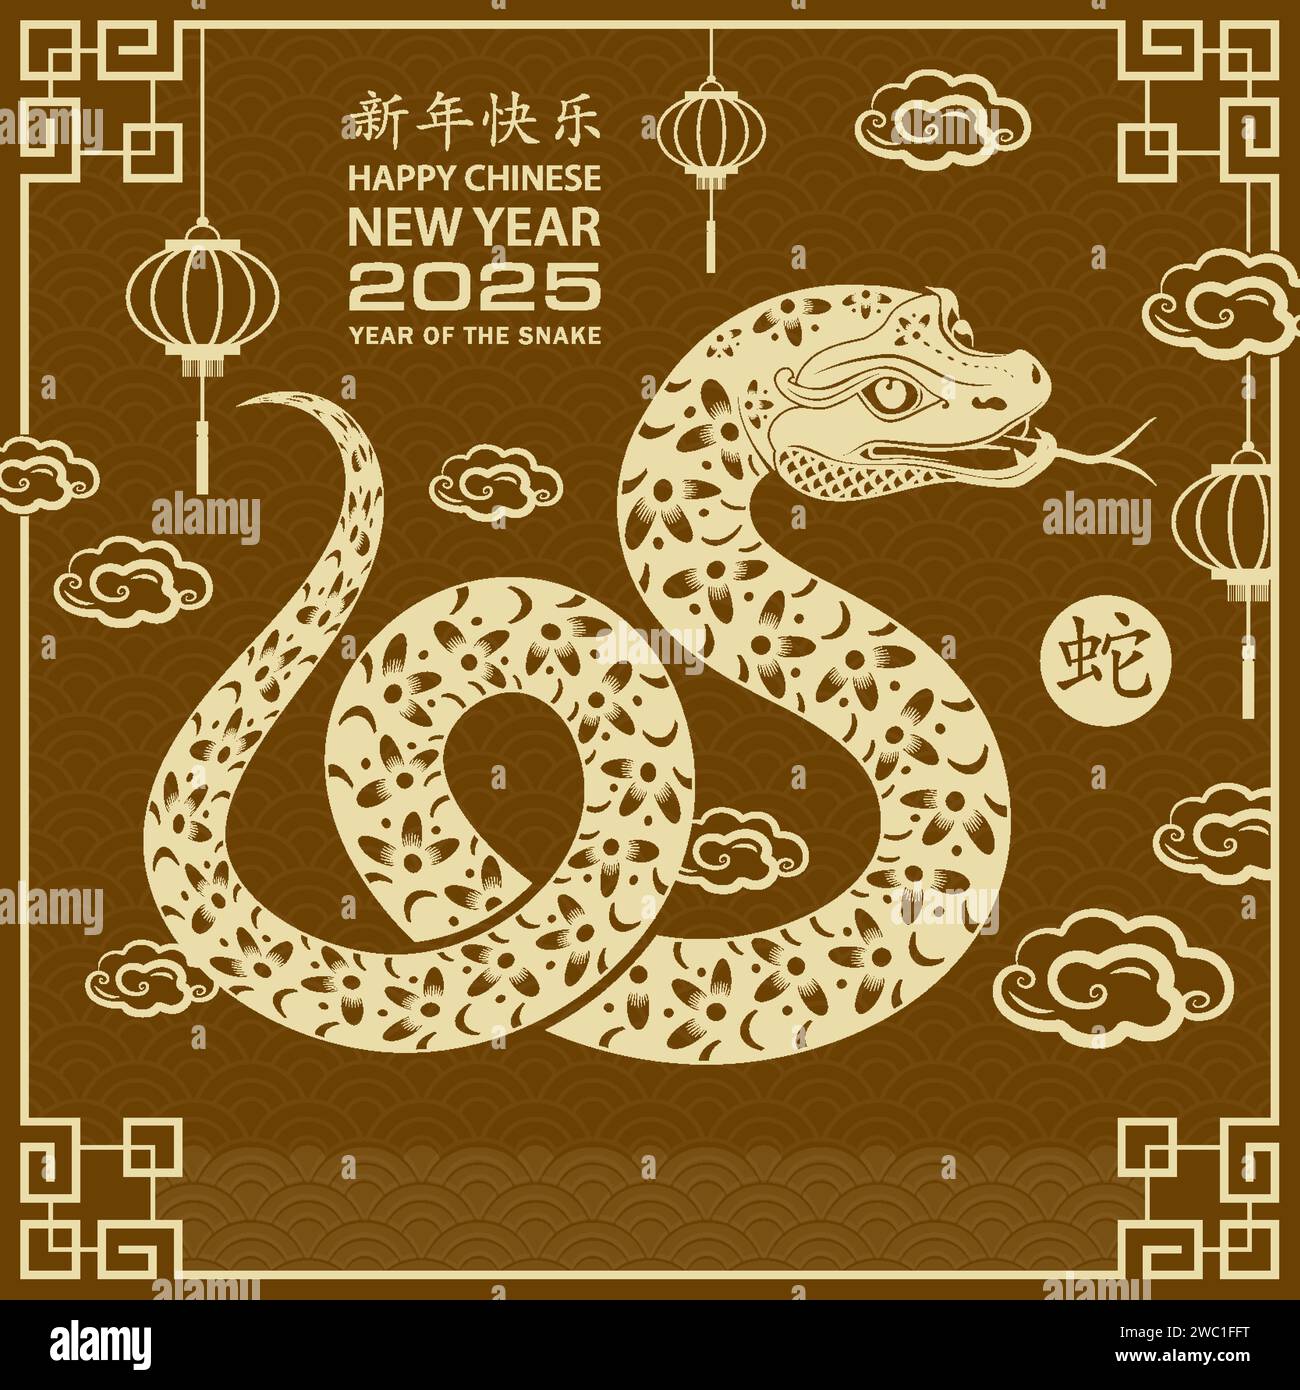 Happy Chinese new year 2025 Zodiac sign, year of the Snake, with yellow ...